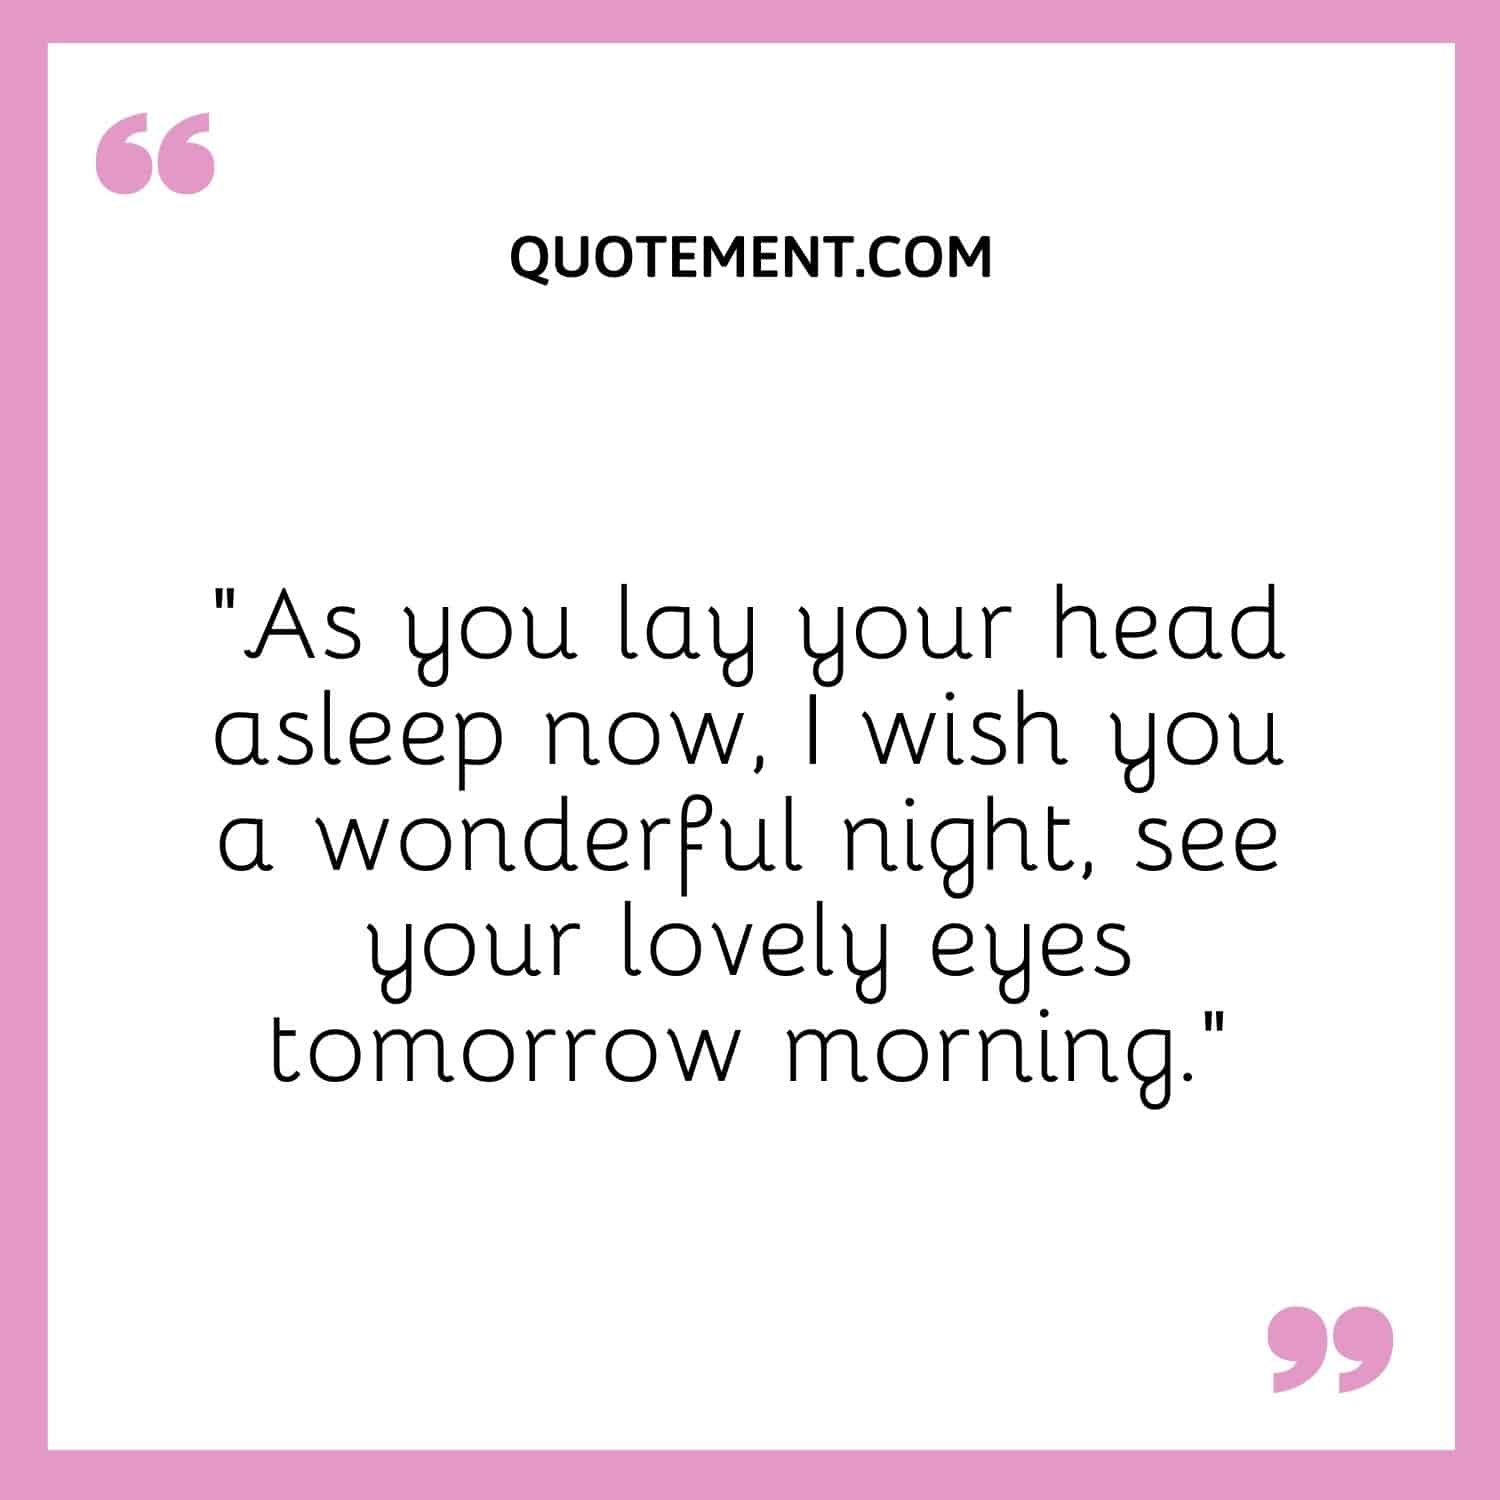 “As you lay your head asleep now, I wish you a wonderful night, see your lovely eyes tomorrow morning.”